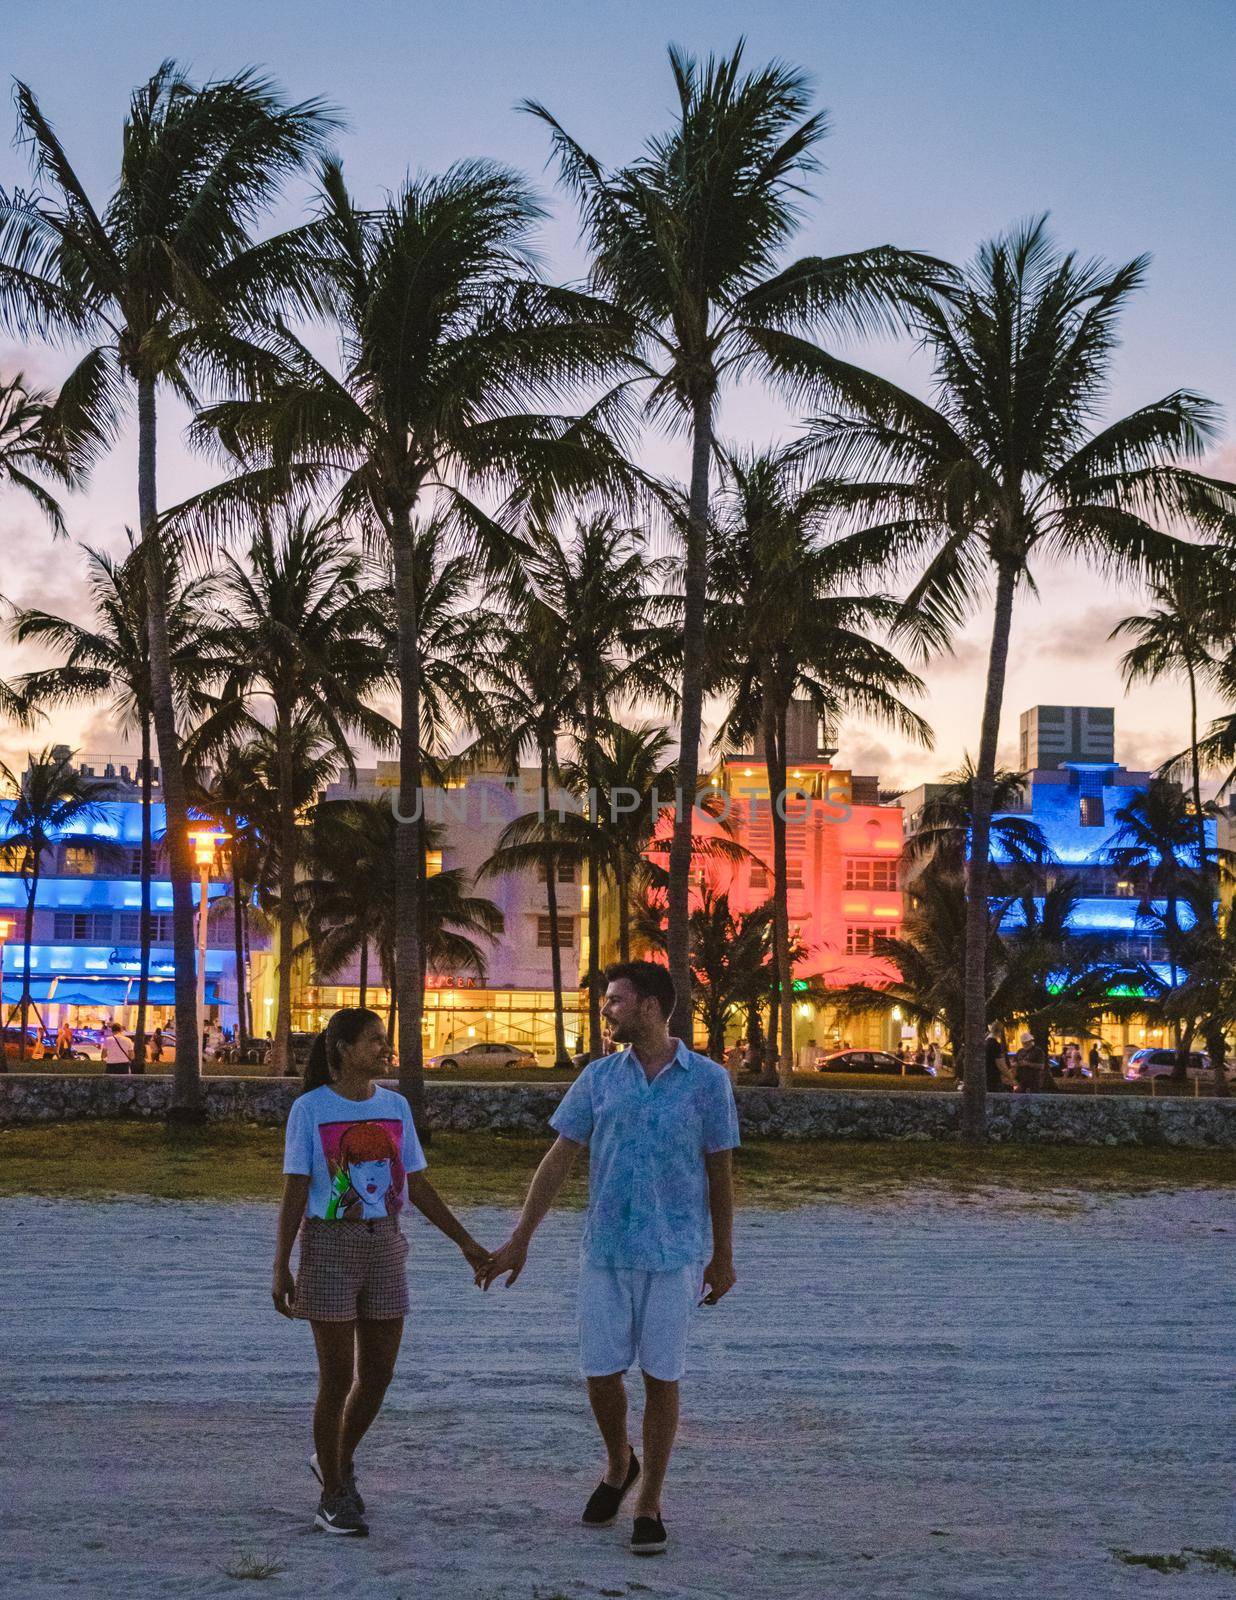 Miami Beach April 2019, colorful Art Deco District at night. Miami Beach Ocean Drive hotels and restaurants at sunset. City skyline with palm trees at night. Art deco nightlife on South beach